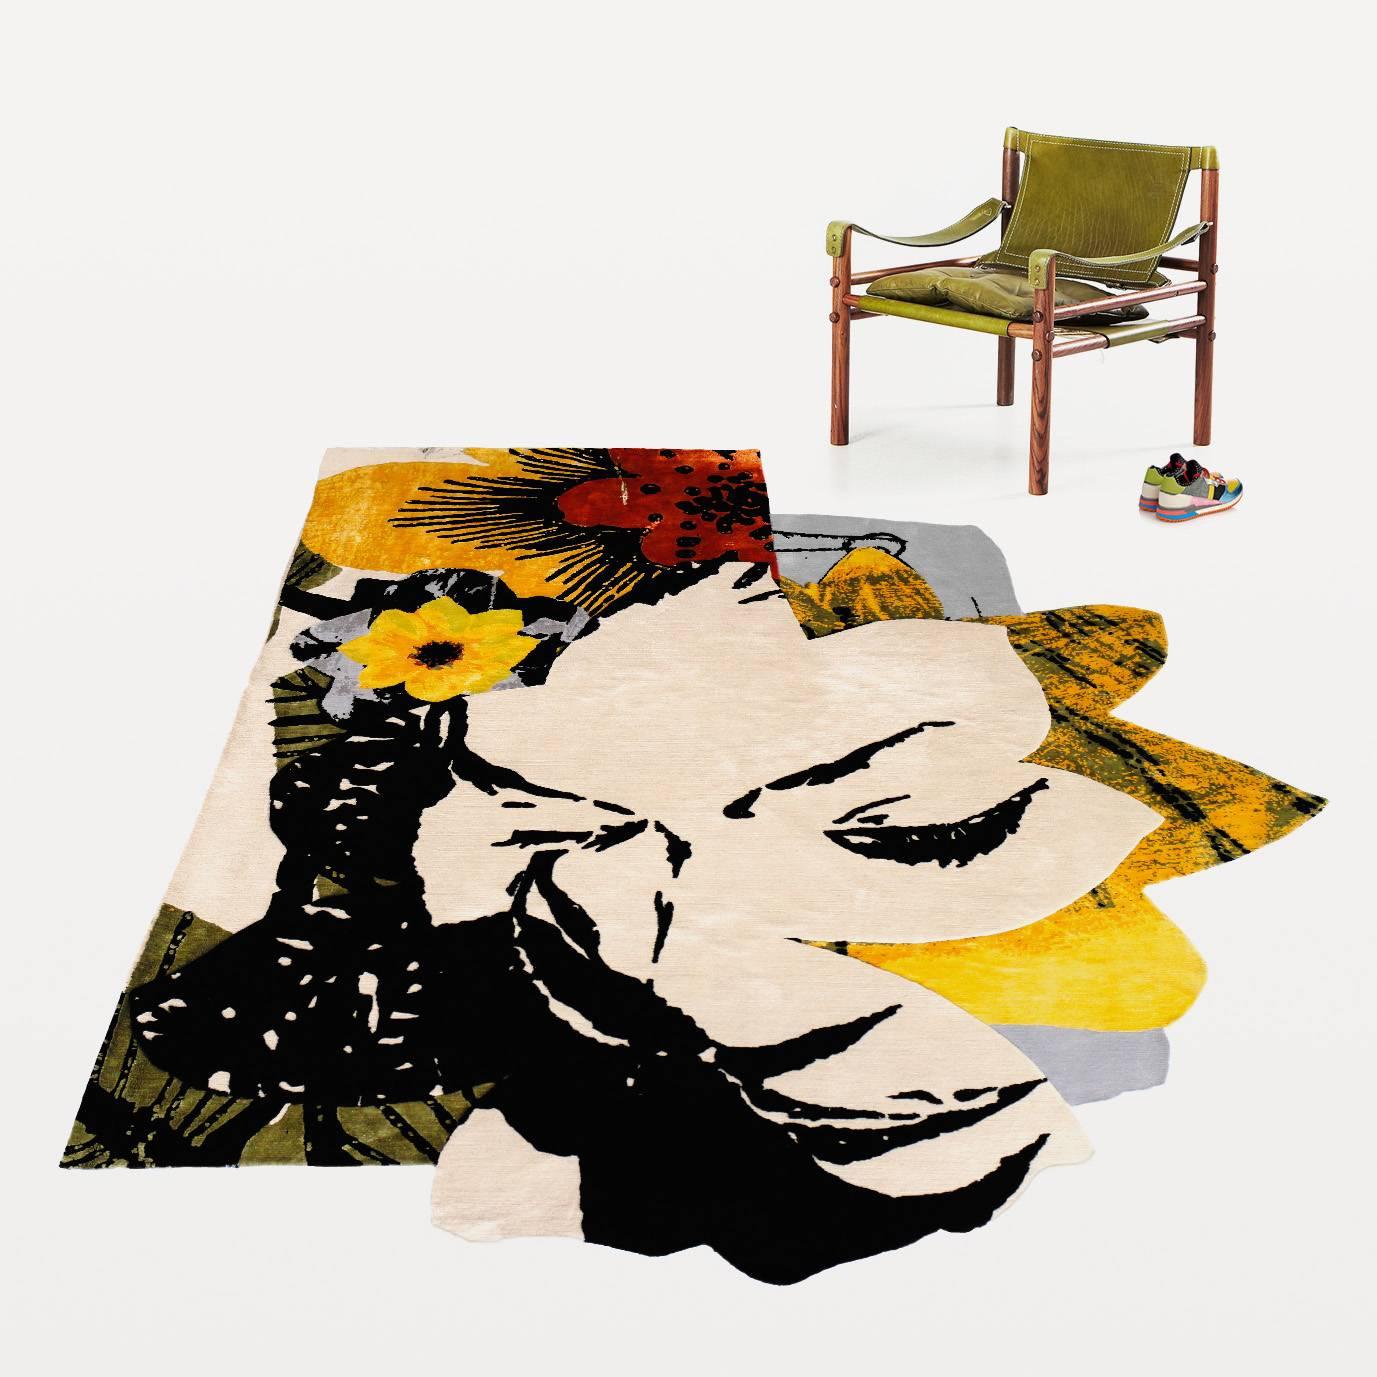 The artwork Mickalene Thomas created for Henzel Studio Collaborations is based on a photo drawing collage. The image is combined with one of Thomas’ hair portraits to bring in a graphic element on top of the decorative and floral background, making